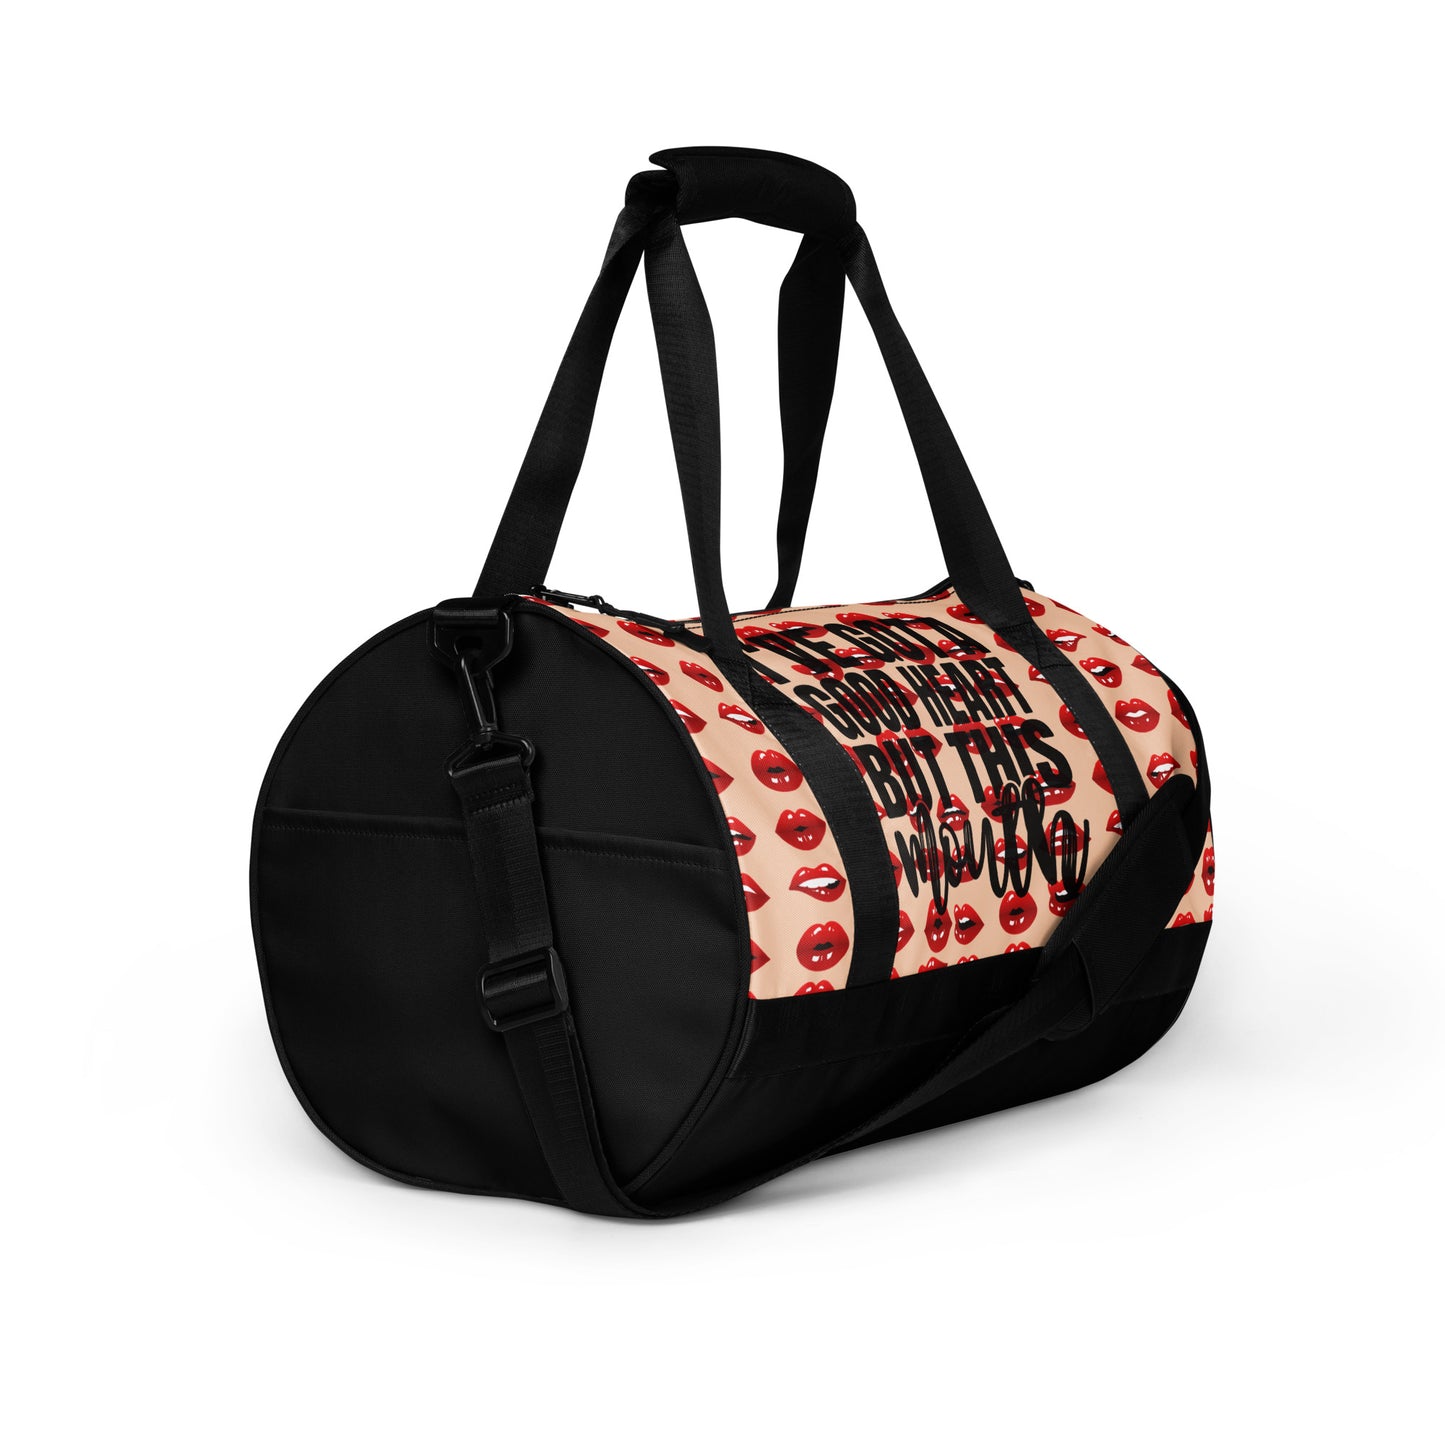 Boldly Authentic Duffle Bag